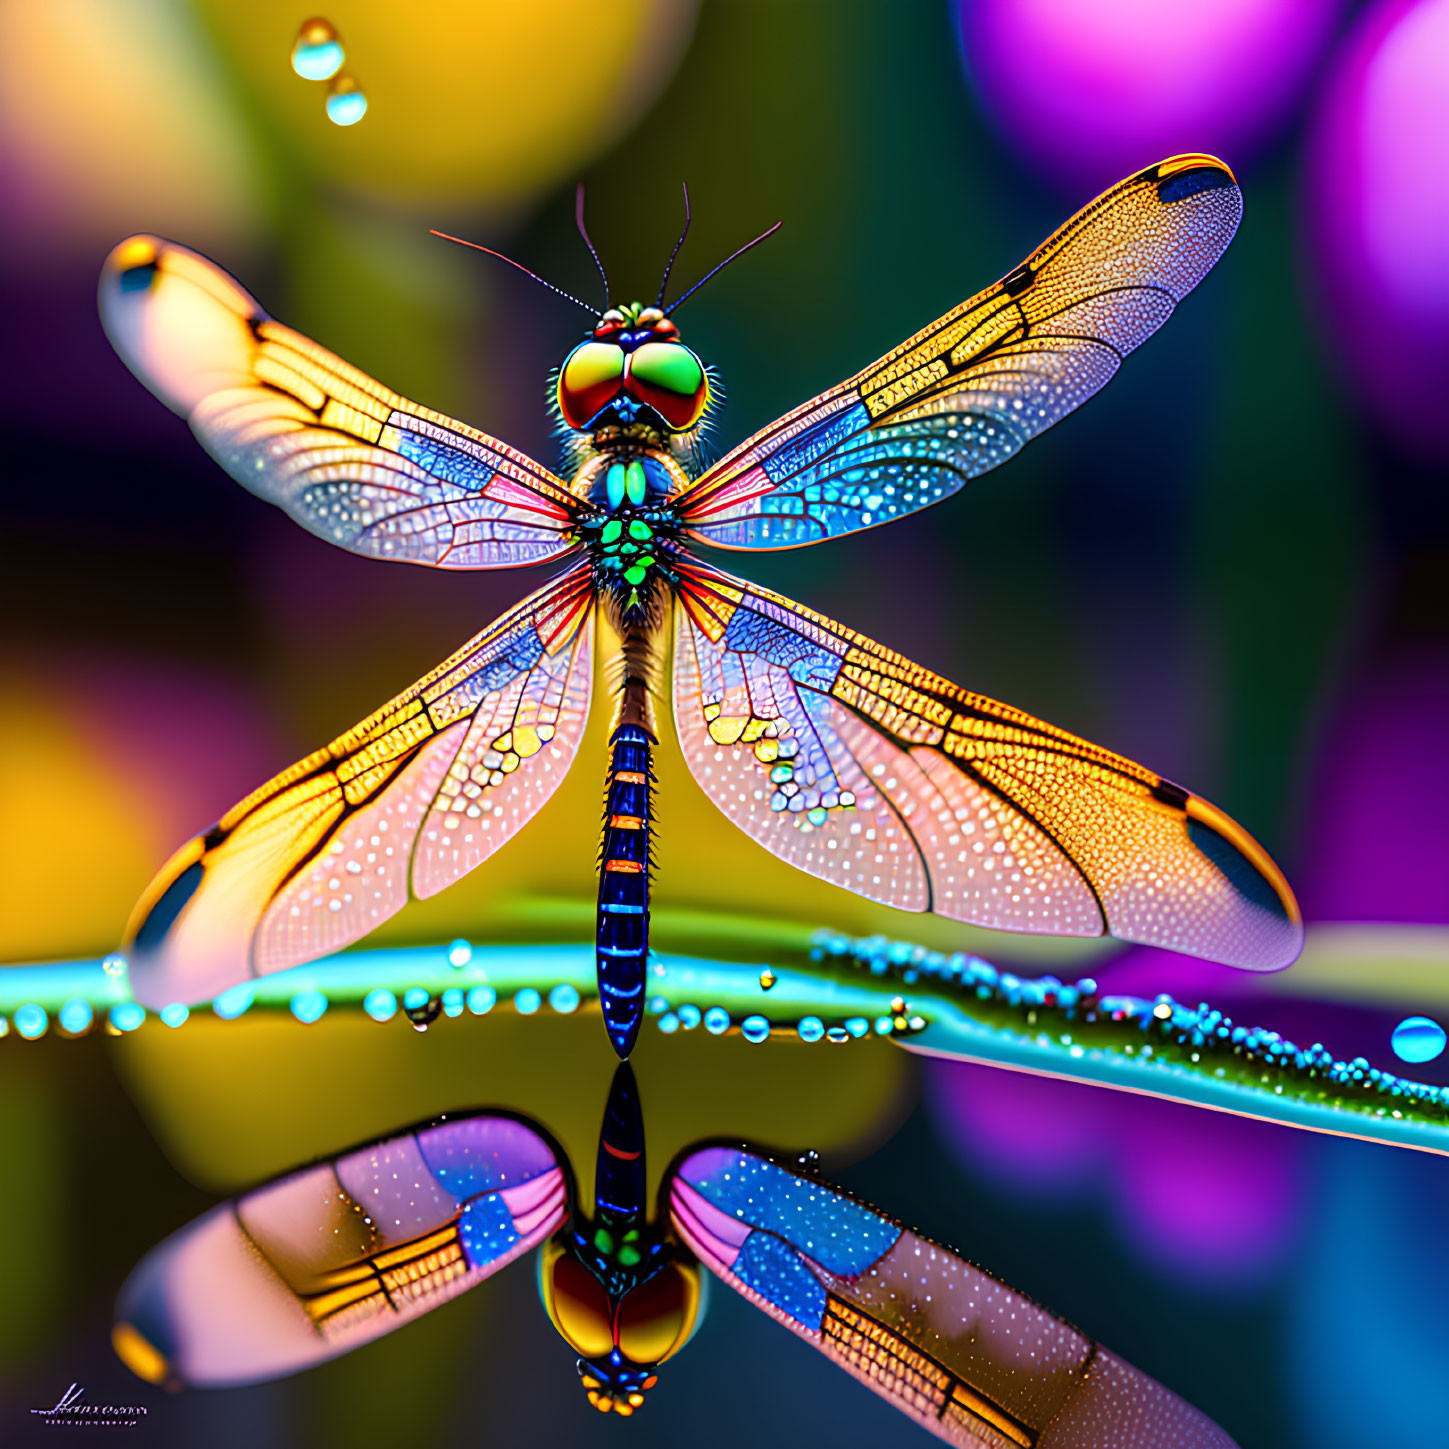 Colorful Dragonfly Resting on Branch Reflected in Water